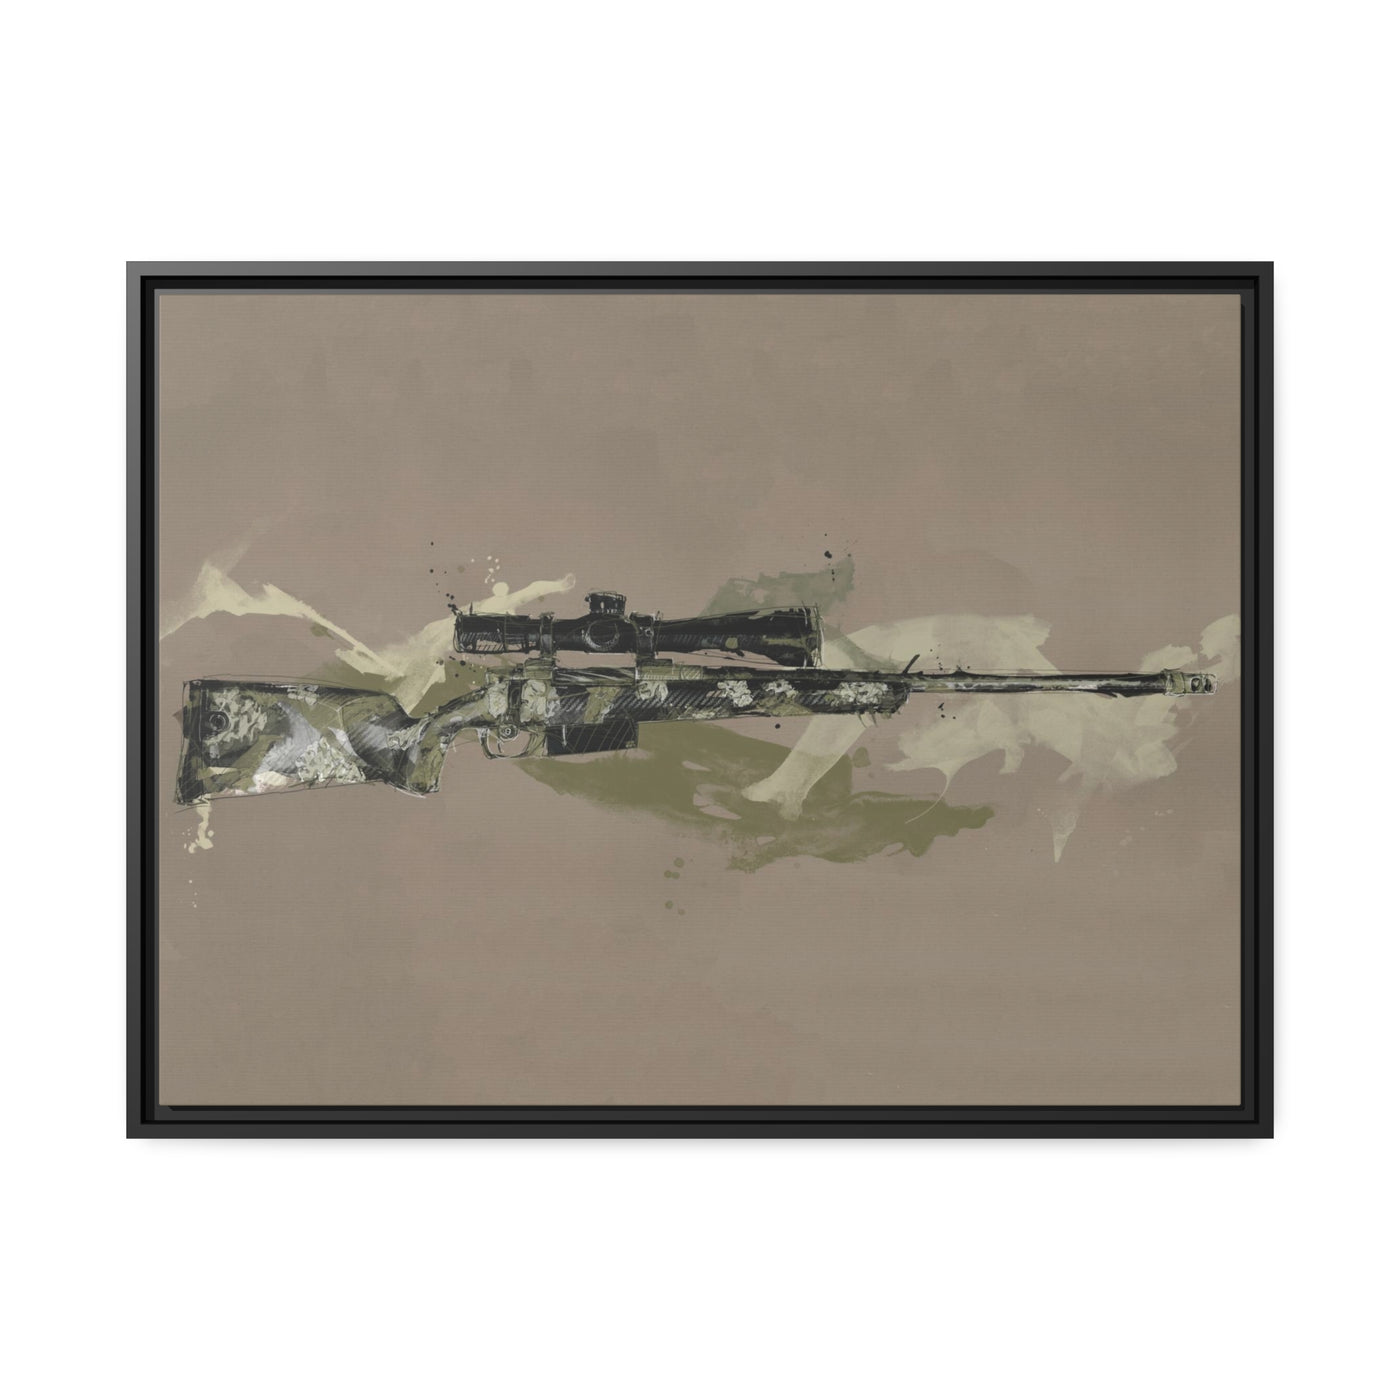 The Harvester - Long Range Hunting Rifle Painting (Minimal) - Black Framed Wrapped Canvas - Value Collection